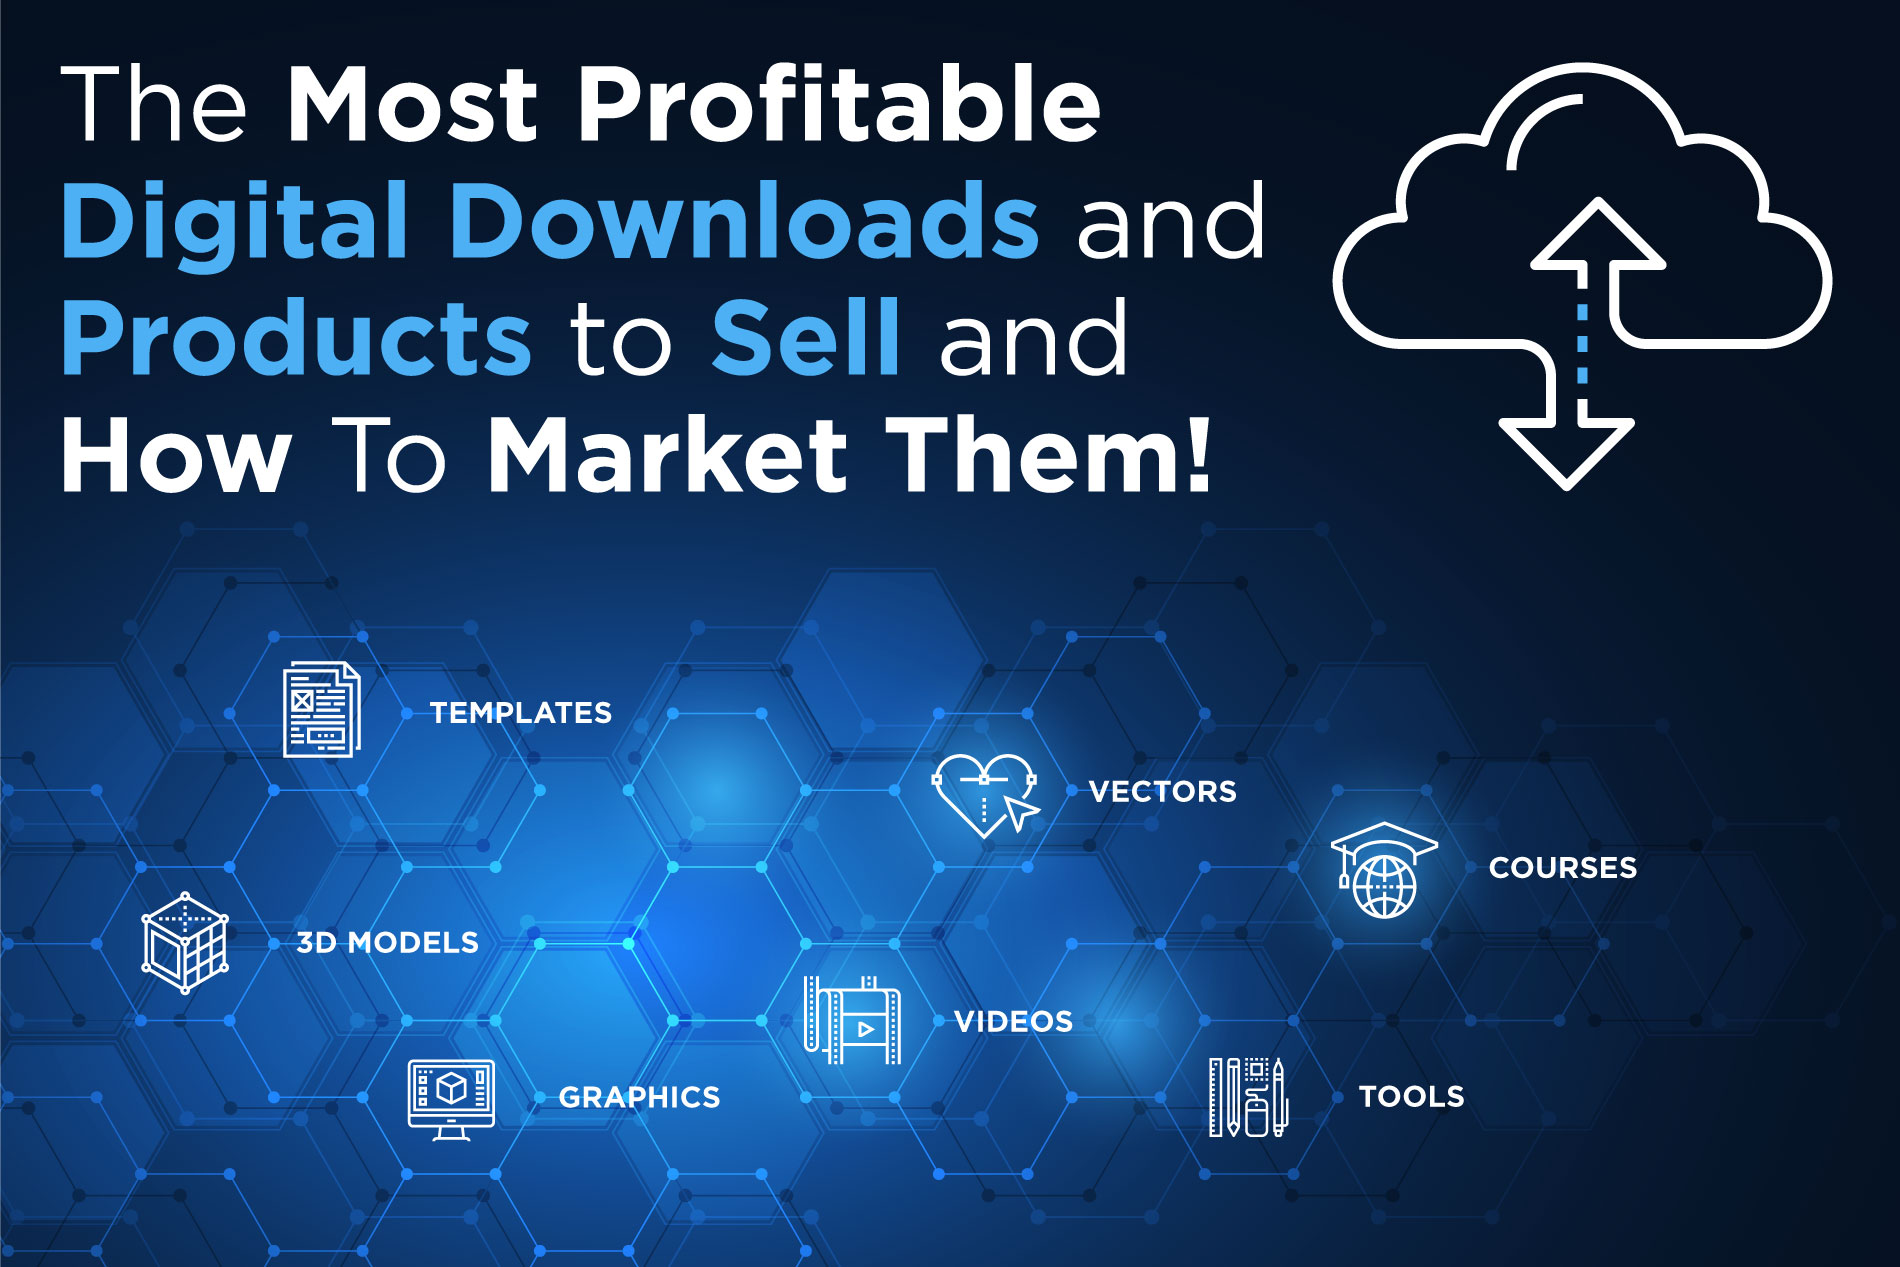 The Most Profitable Digital Downloads and Products to Sell and How To Market Them